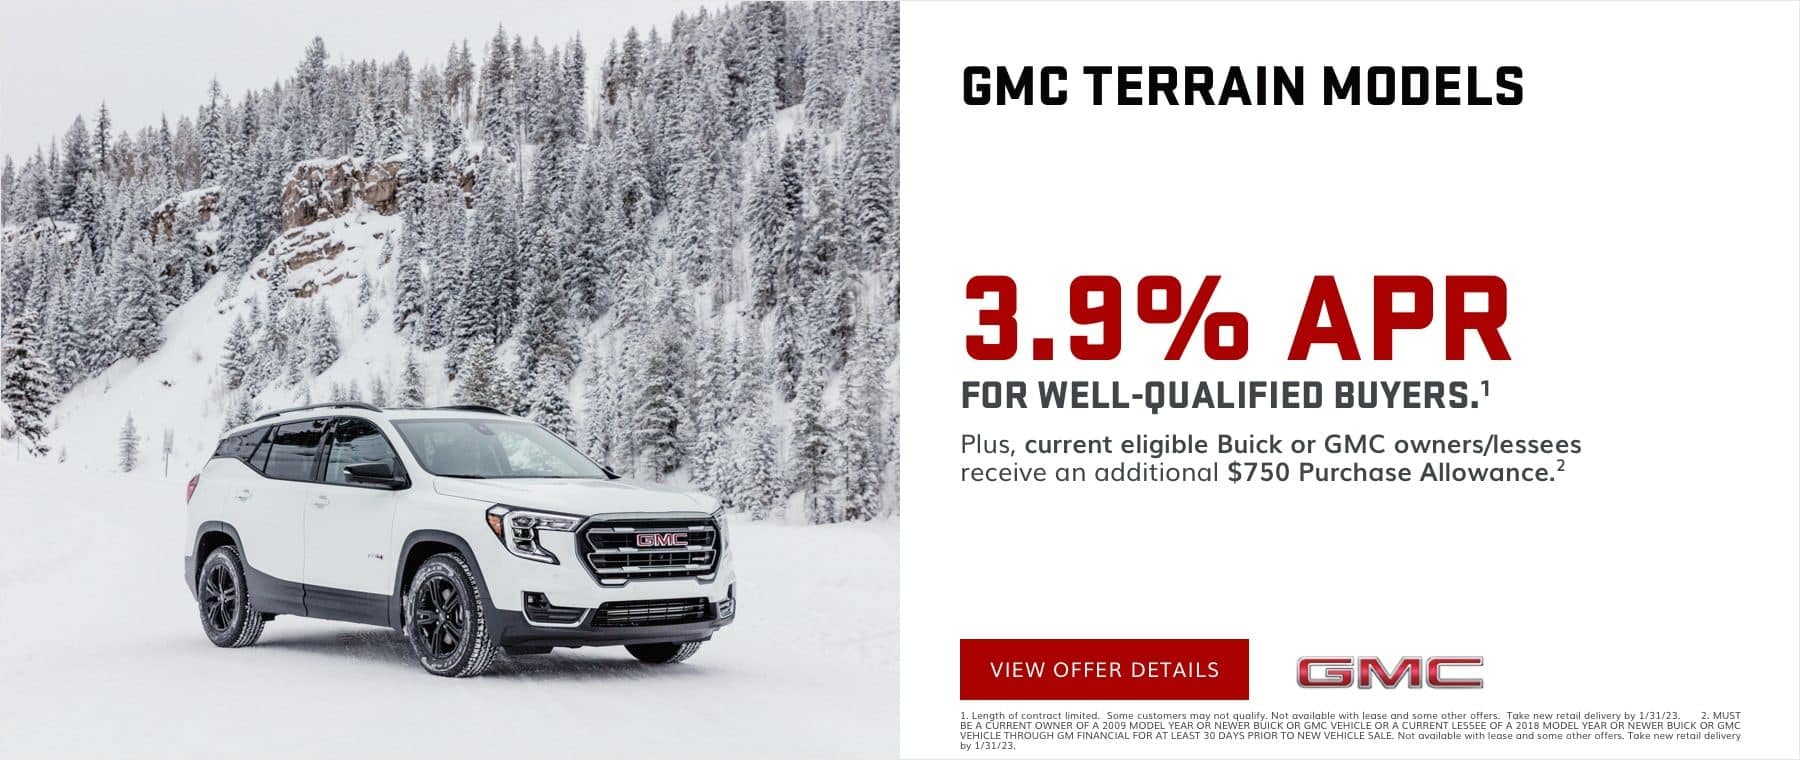 3.9% APR for well-qualified buyers.1 Plus, current eligible Buick or GMC owners/lessees receive an additional $750 Purchase Allowance.2